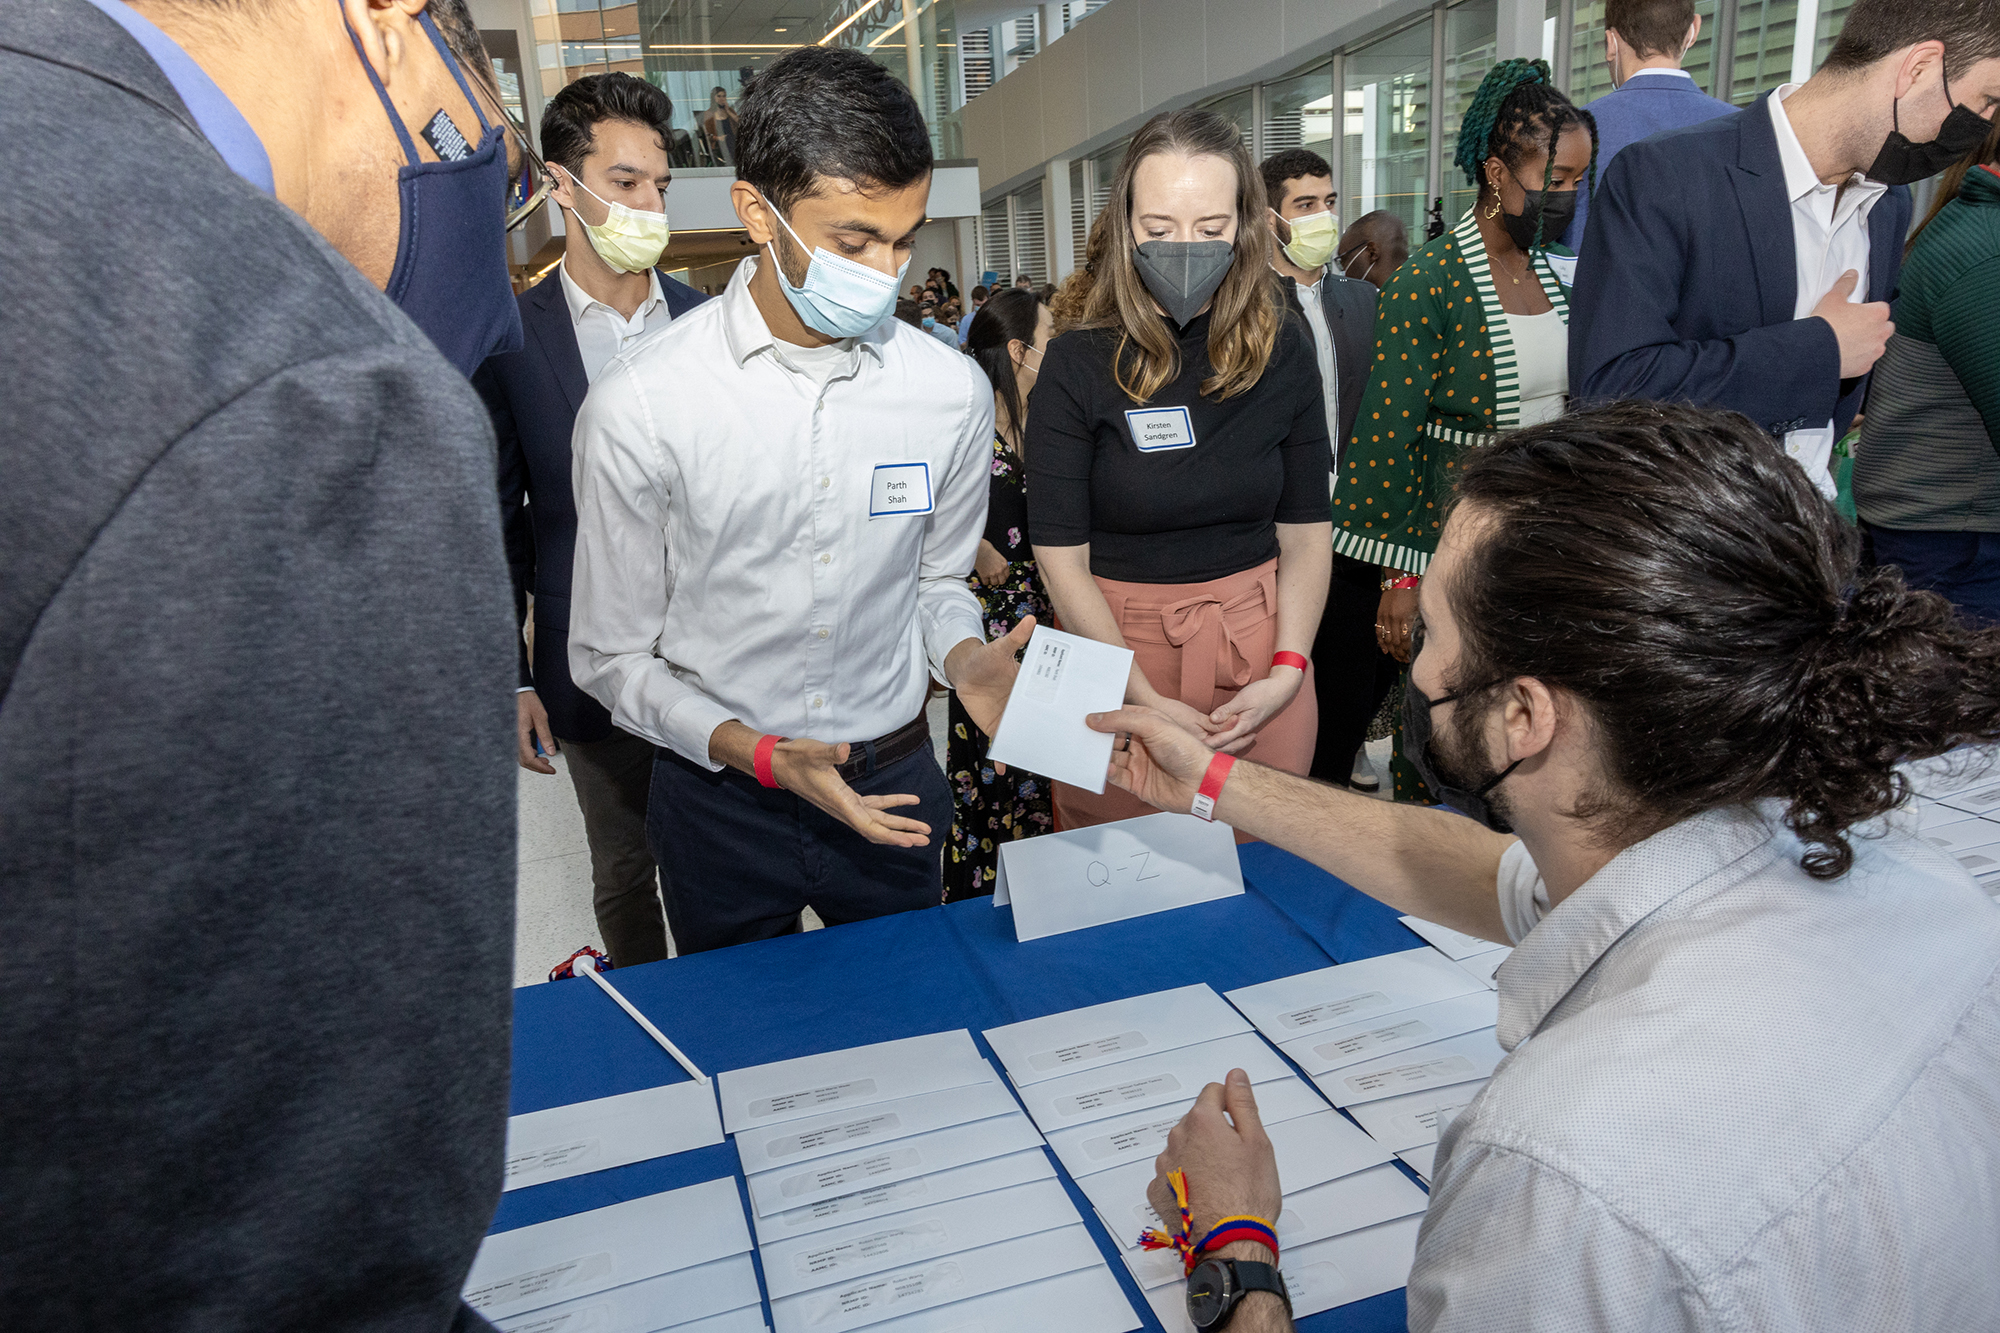 A Penn Med student receives their Match Day letter from someone seated at a table full of envelopes.